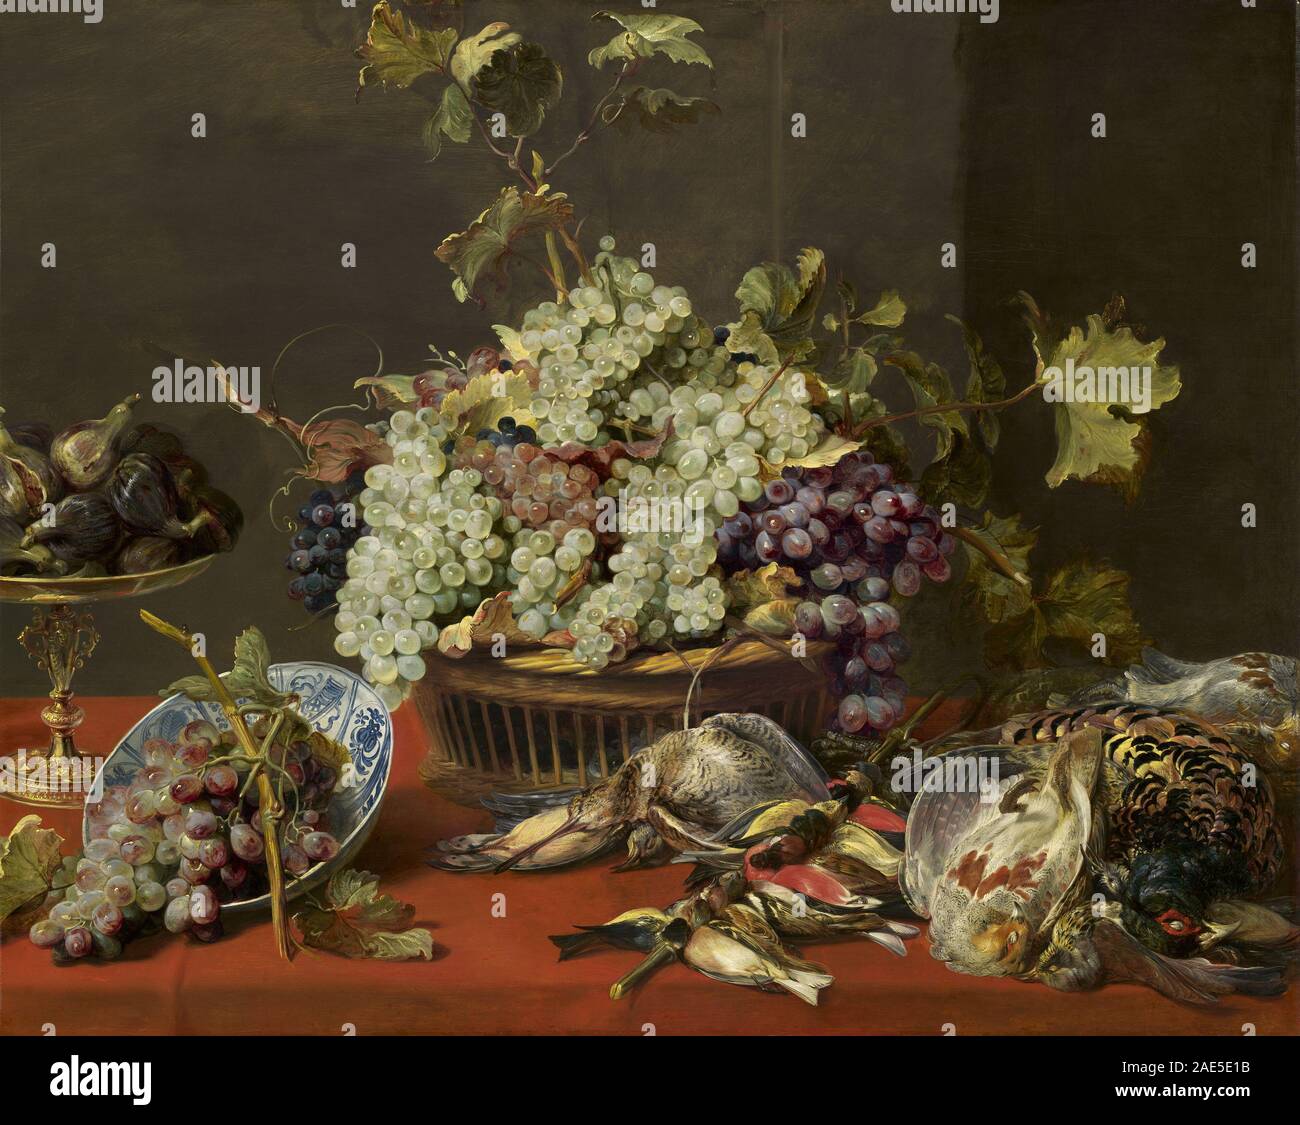 Page 2 - Frans Snyders High Resolution Stock Photography and Images - Alamy